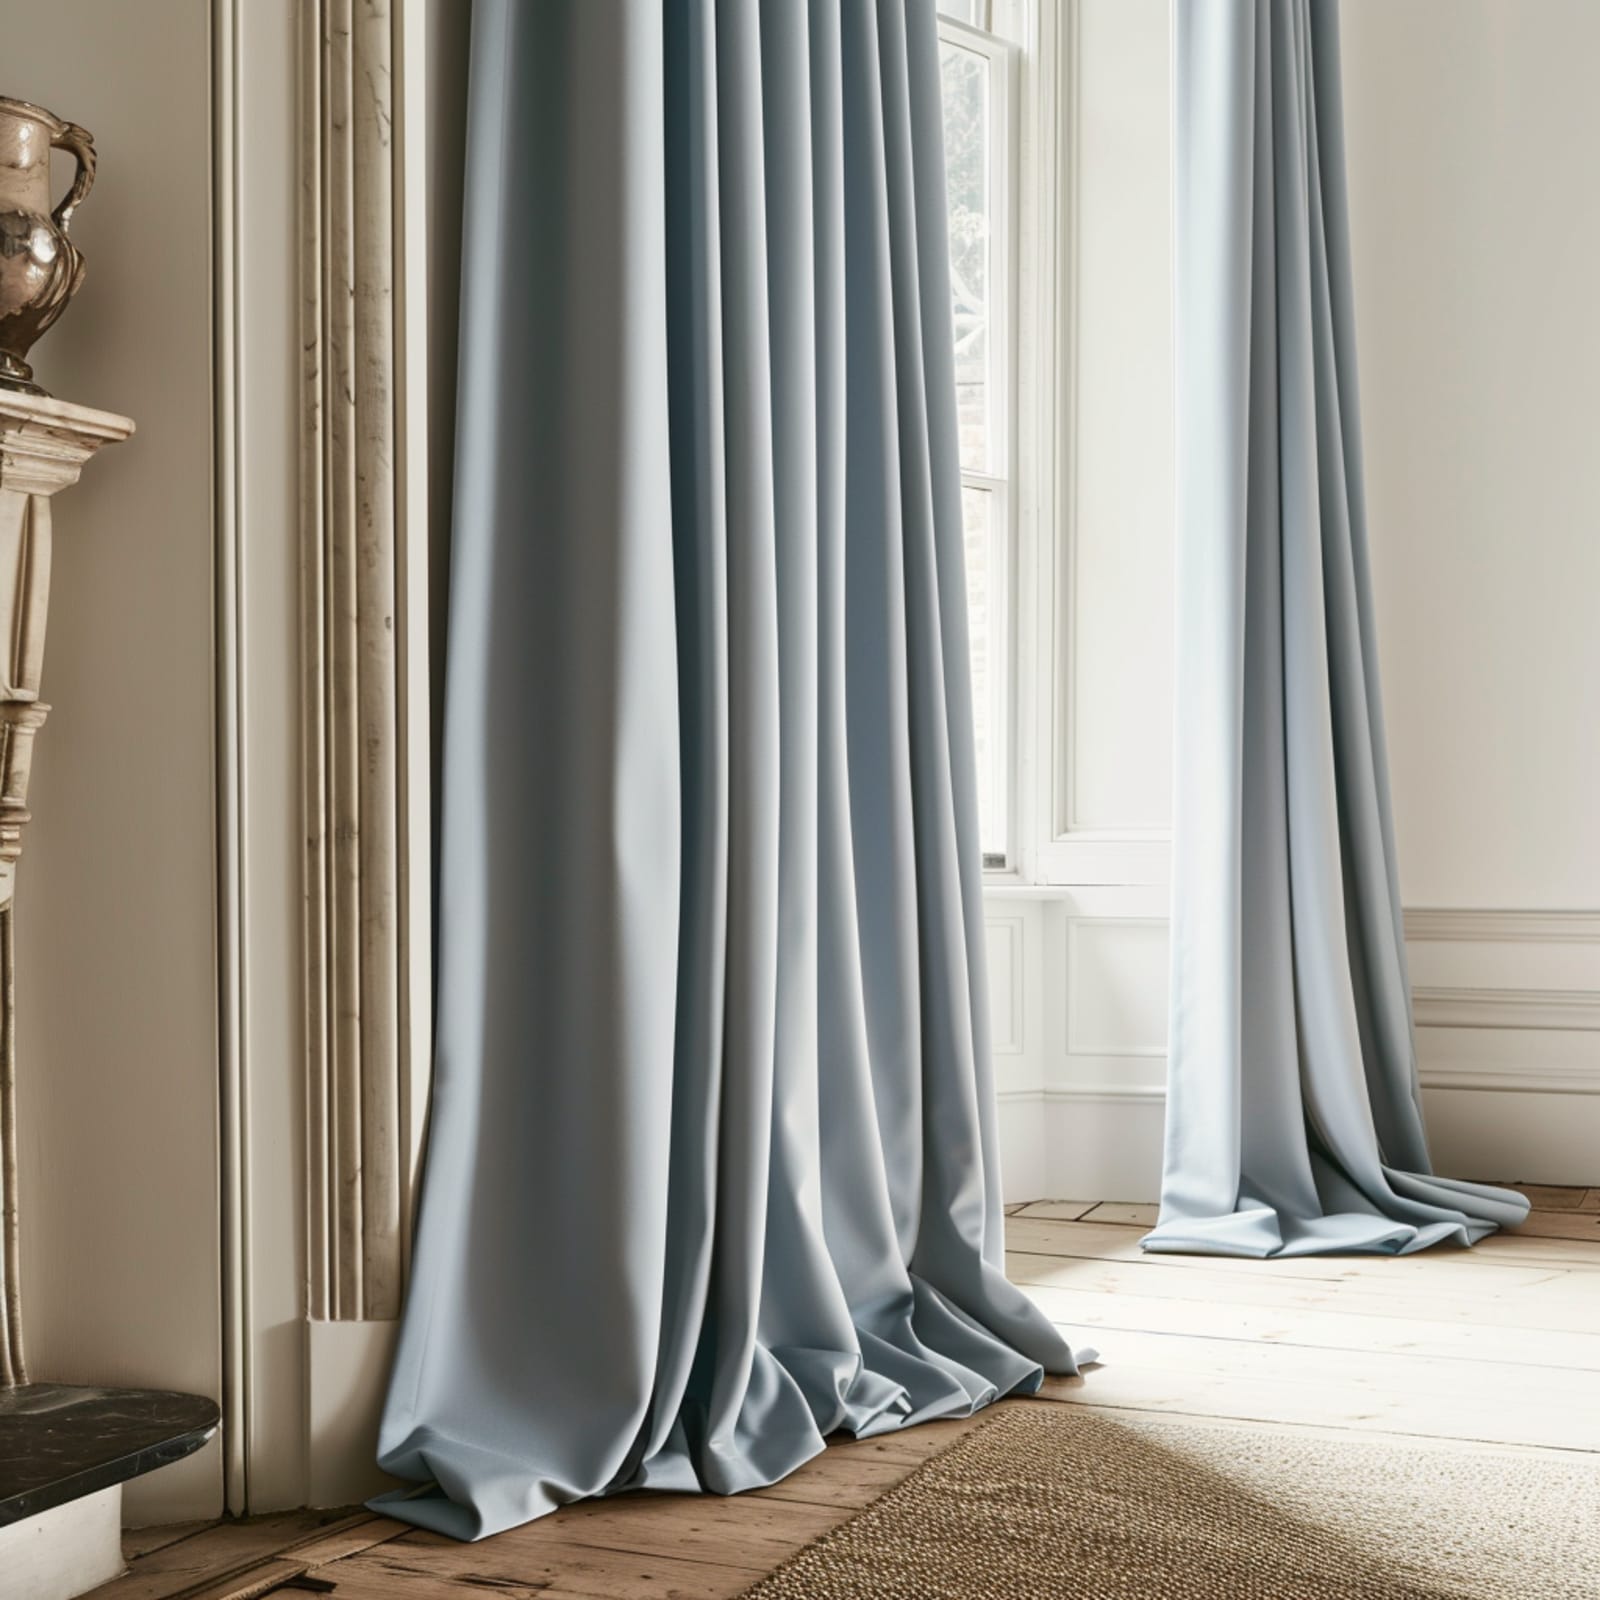 Cotton Weave, Sky Made to Measure Curtains